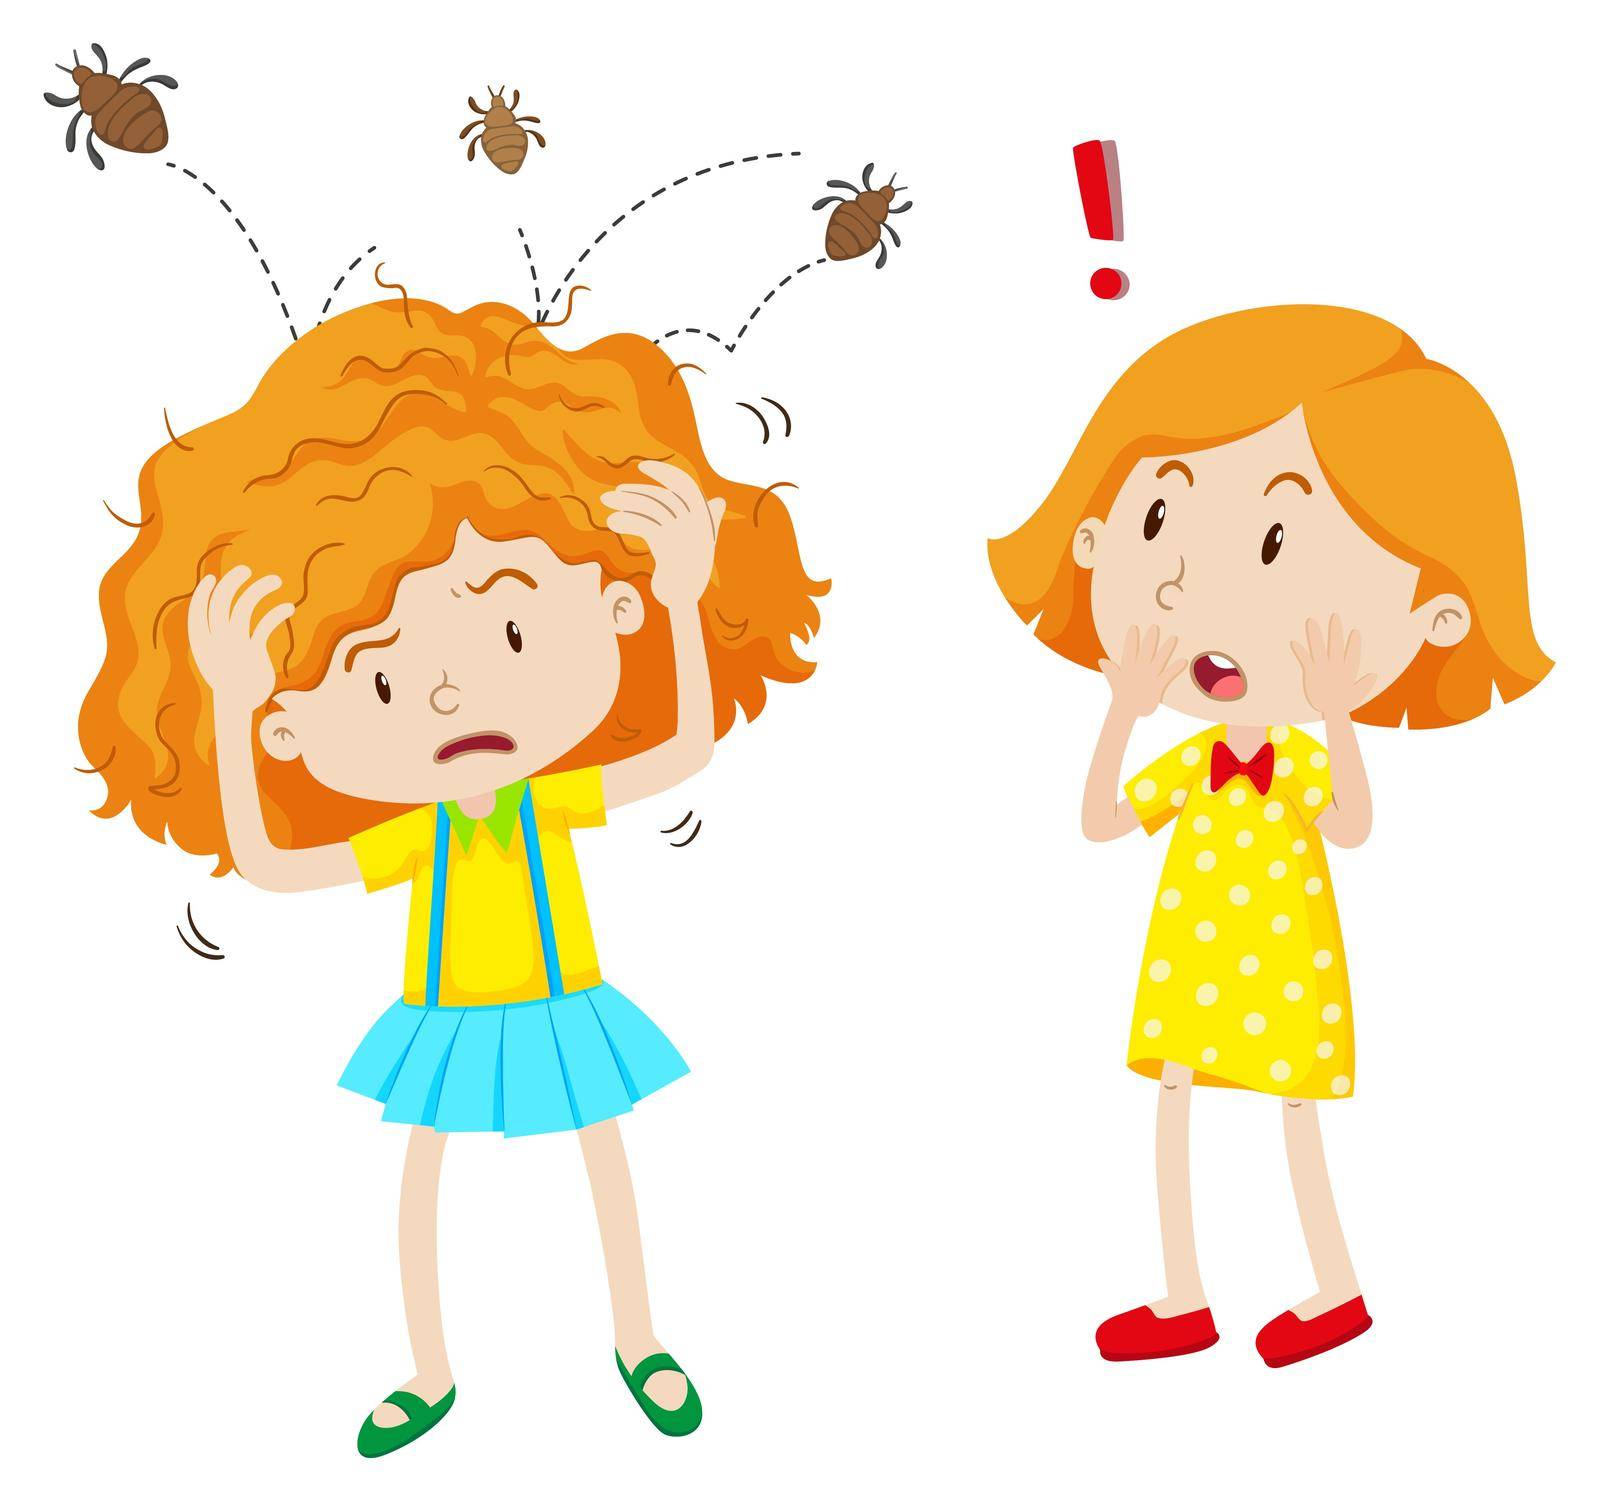 Girl with head lice jumping in her head illustration